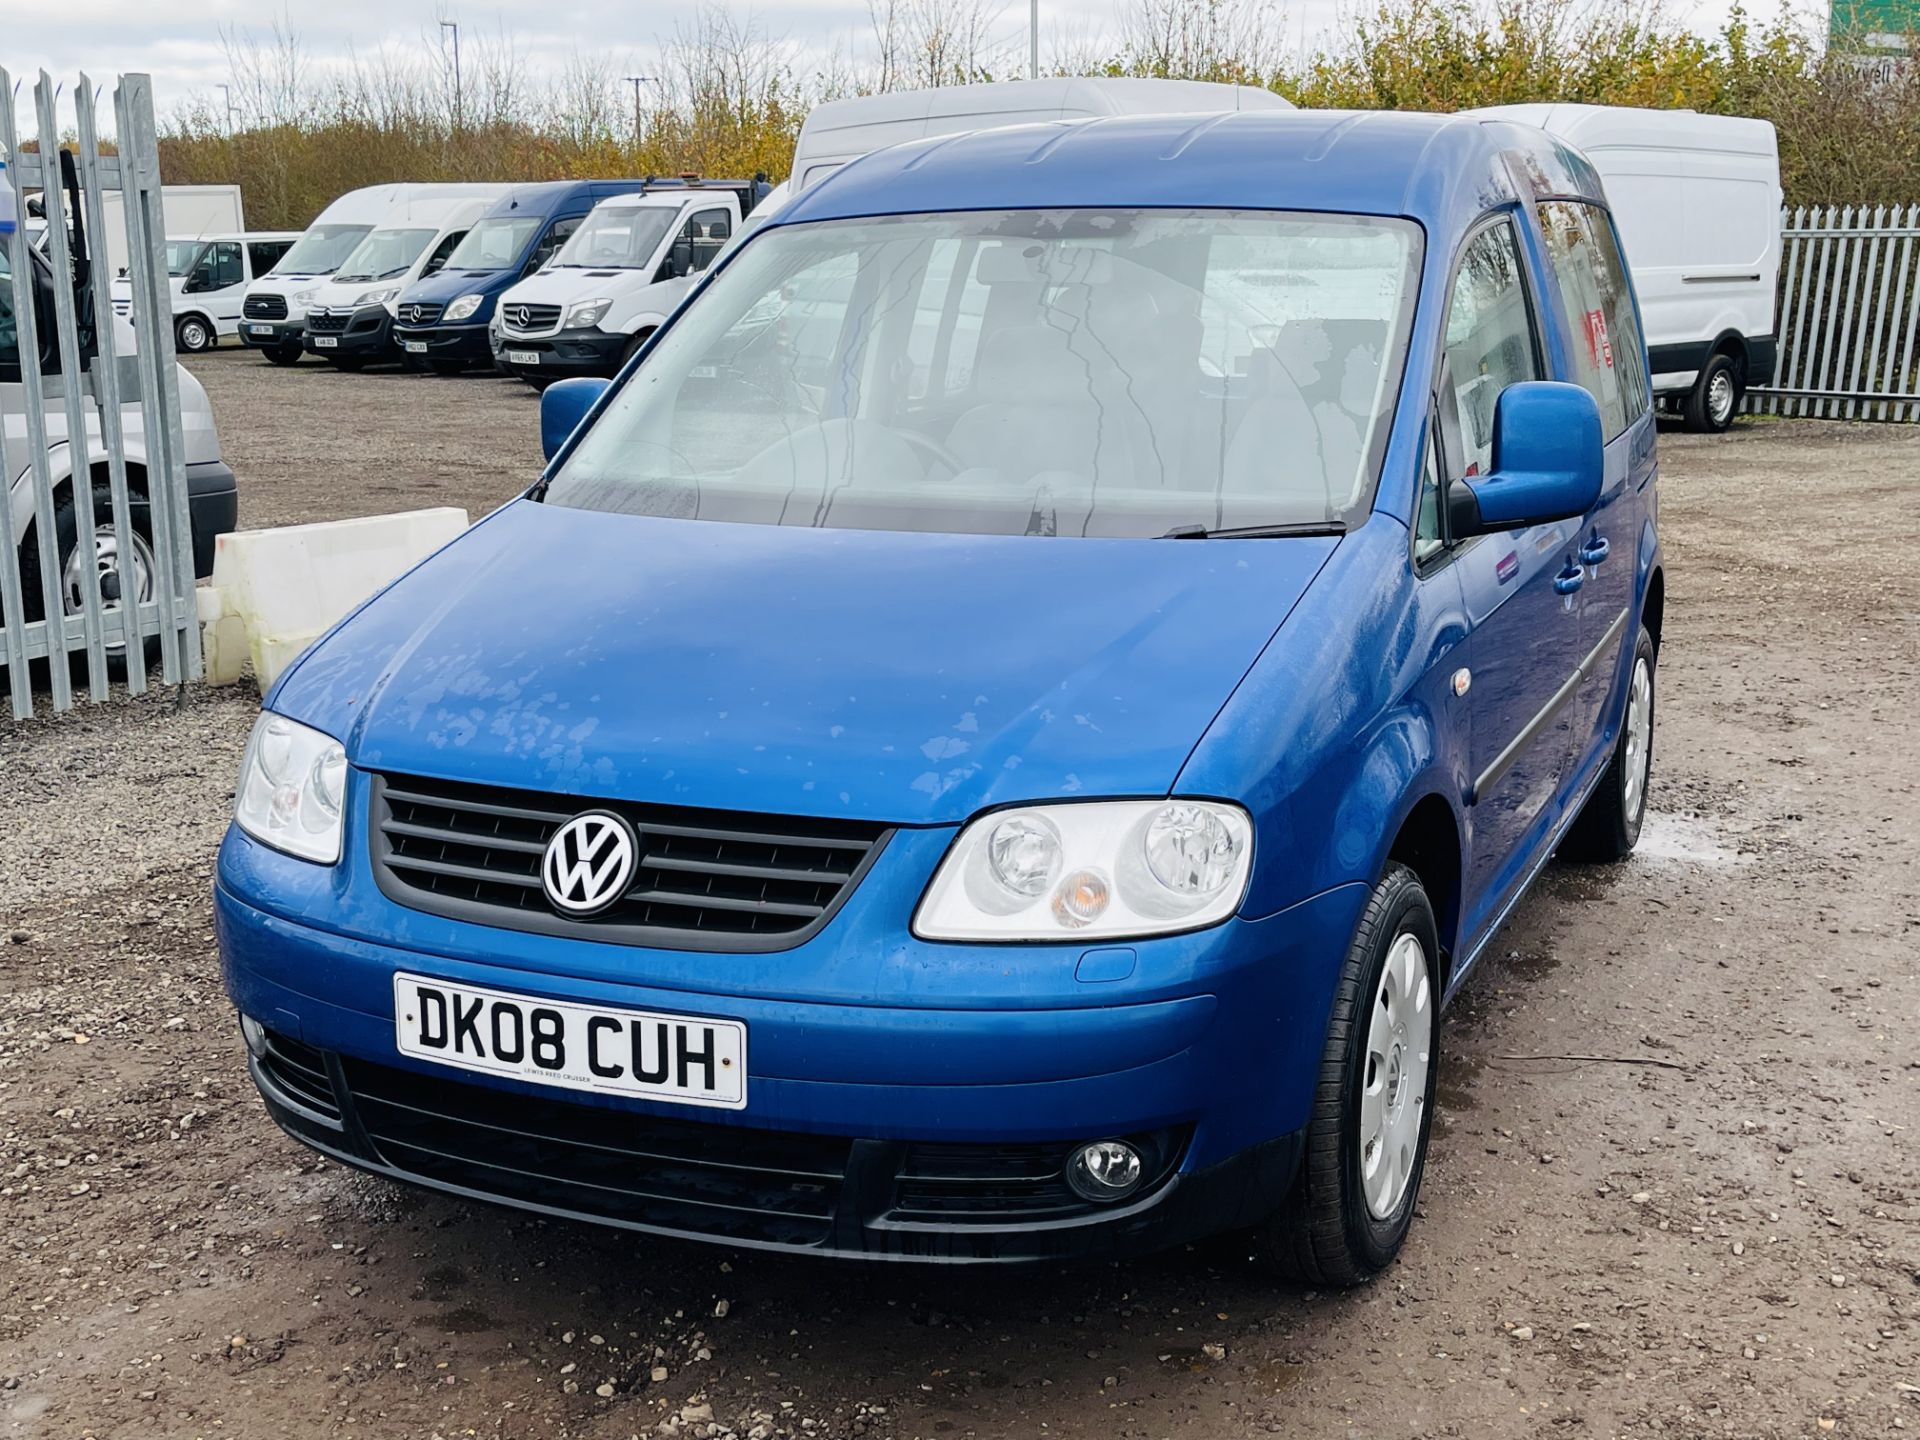 ** ON SALE ** Volkswagen Caddy Life 1.9 TDI DSG Auto 2008 '08 Reg'Air Con - Only Done 38k - - Image 4 of 24